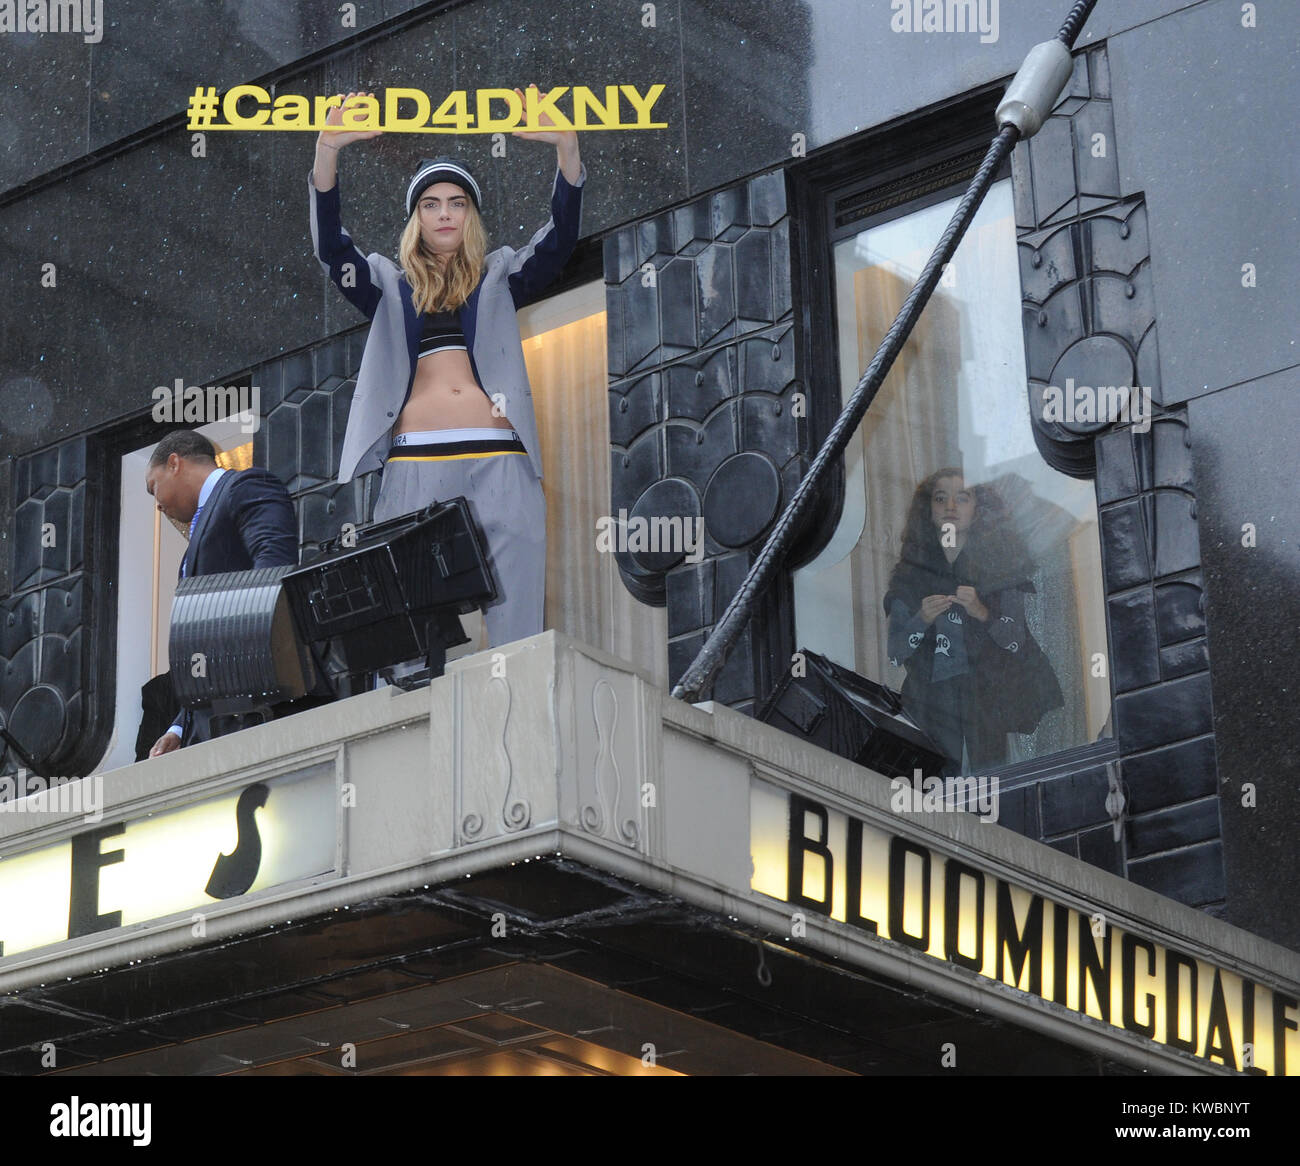 NEW YORK, NY - OCTOBER 11: Model Cara Delevingne for DKNY launch at Bloomingdale's 59th Street on October 11, 2014 in New York City.    People:  Cara Delevingne Stock Photo